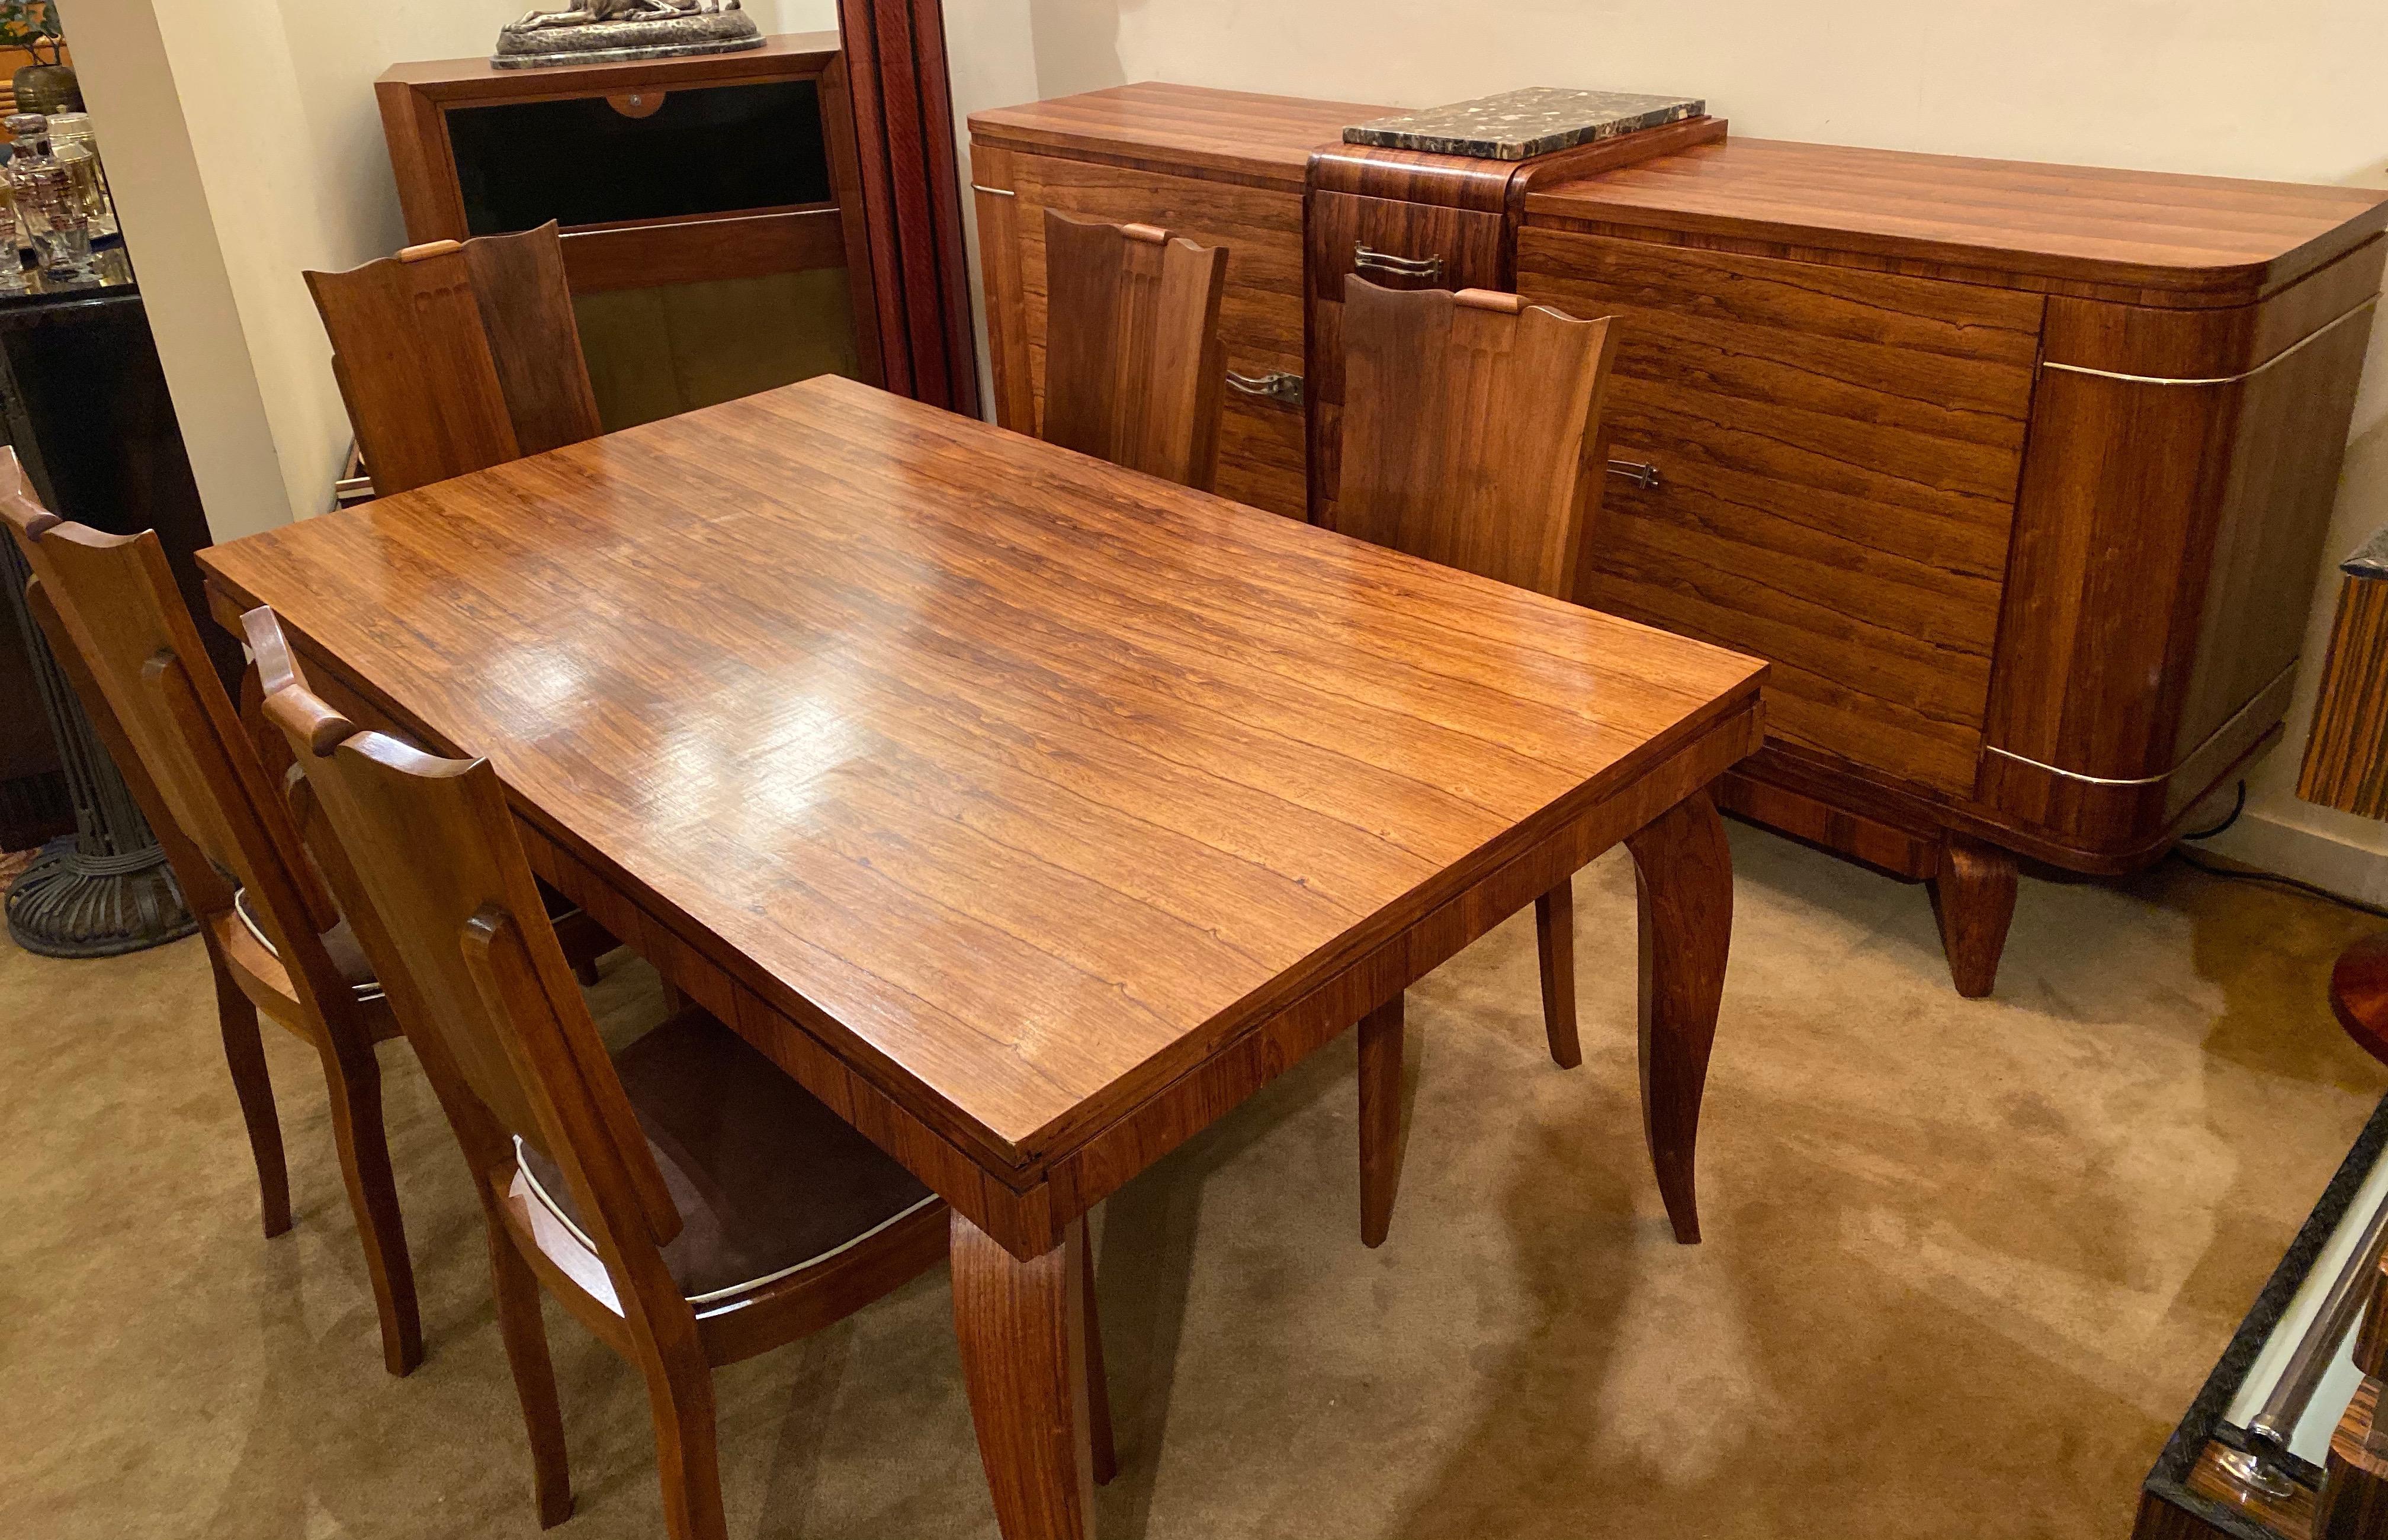 Attributed to Jule Leleu, French Art Deco dining room suite: Buffet, table and 6 chairs. Spectacular bookmatched veneers in wild vertical grain wood. Look how closely the wood grains help to create the intensity of the design, which of course